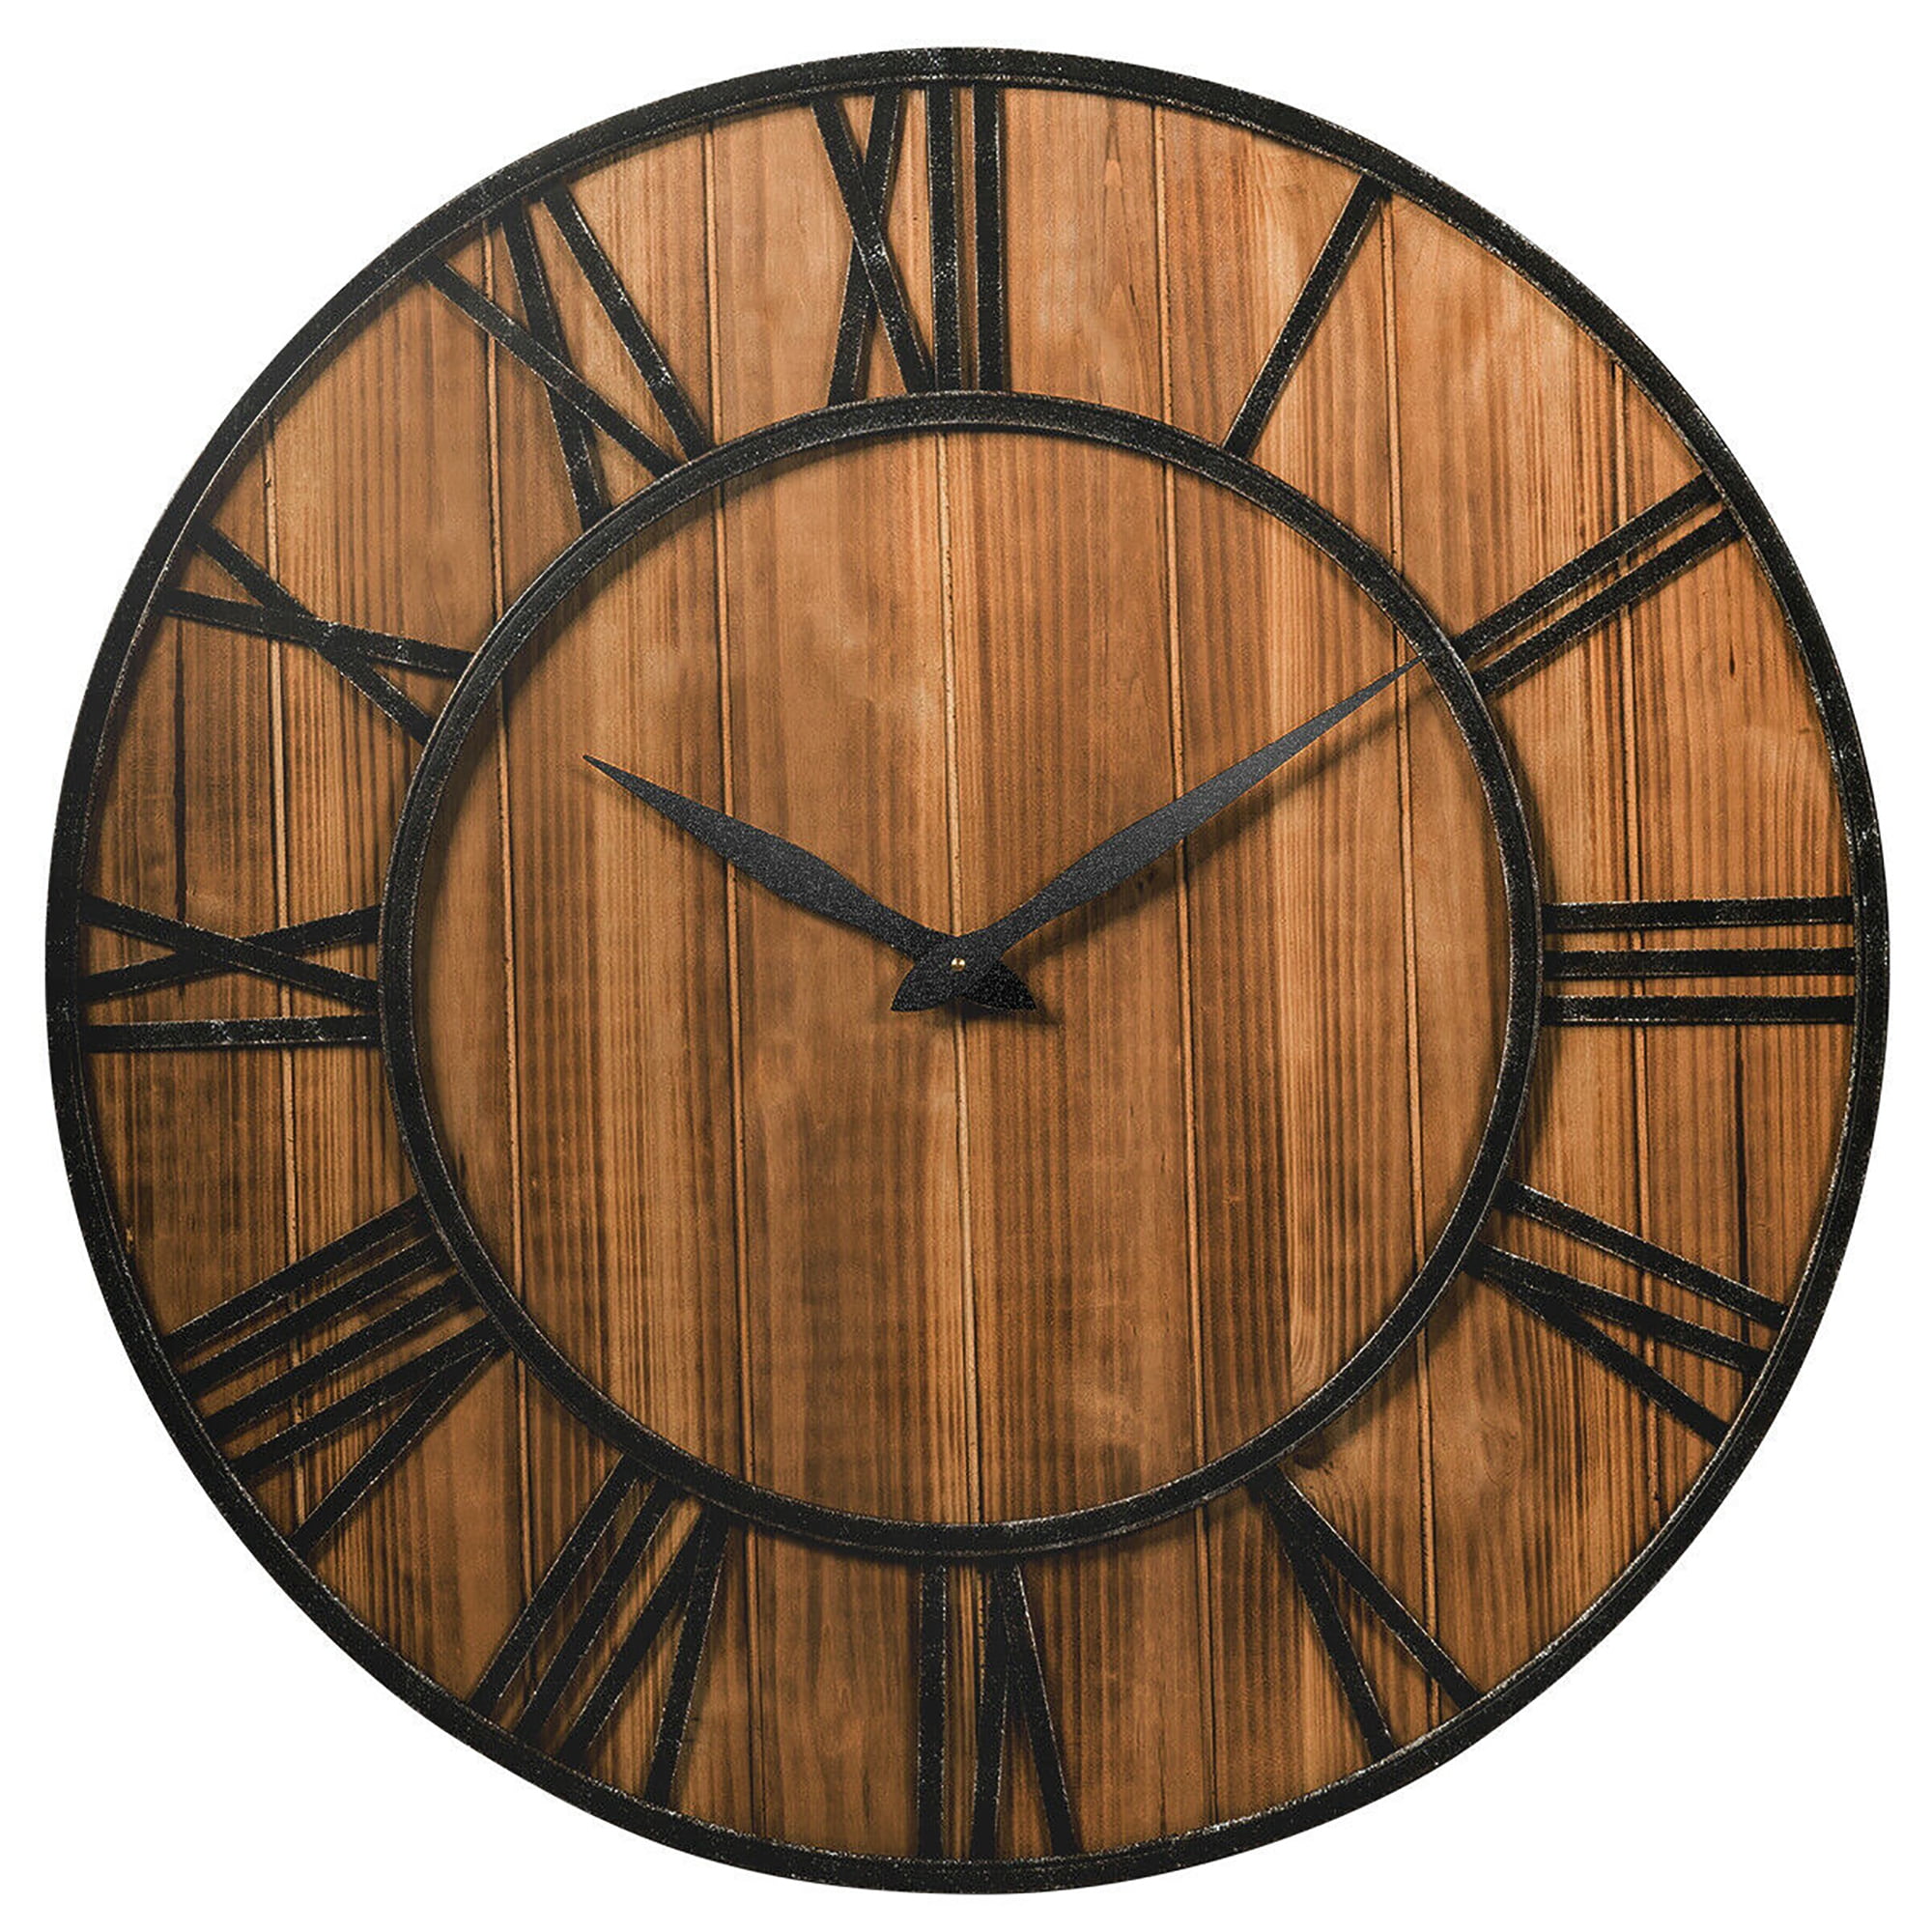 Wooden Wall Clock 12 Inch I Only Have for You Silent No Round Battery Operated for Home Vintage Farmhouse Mother Dad Gift